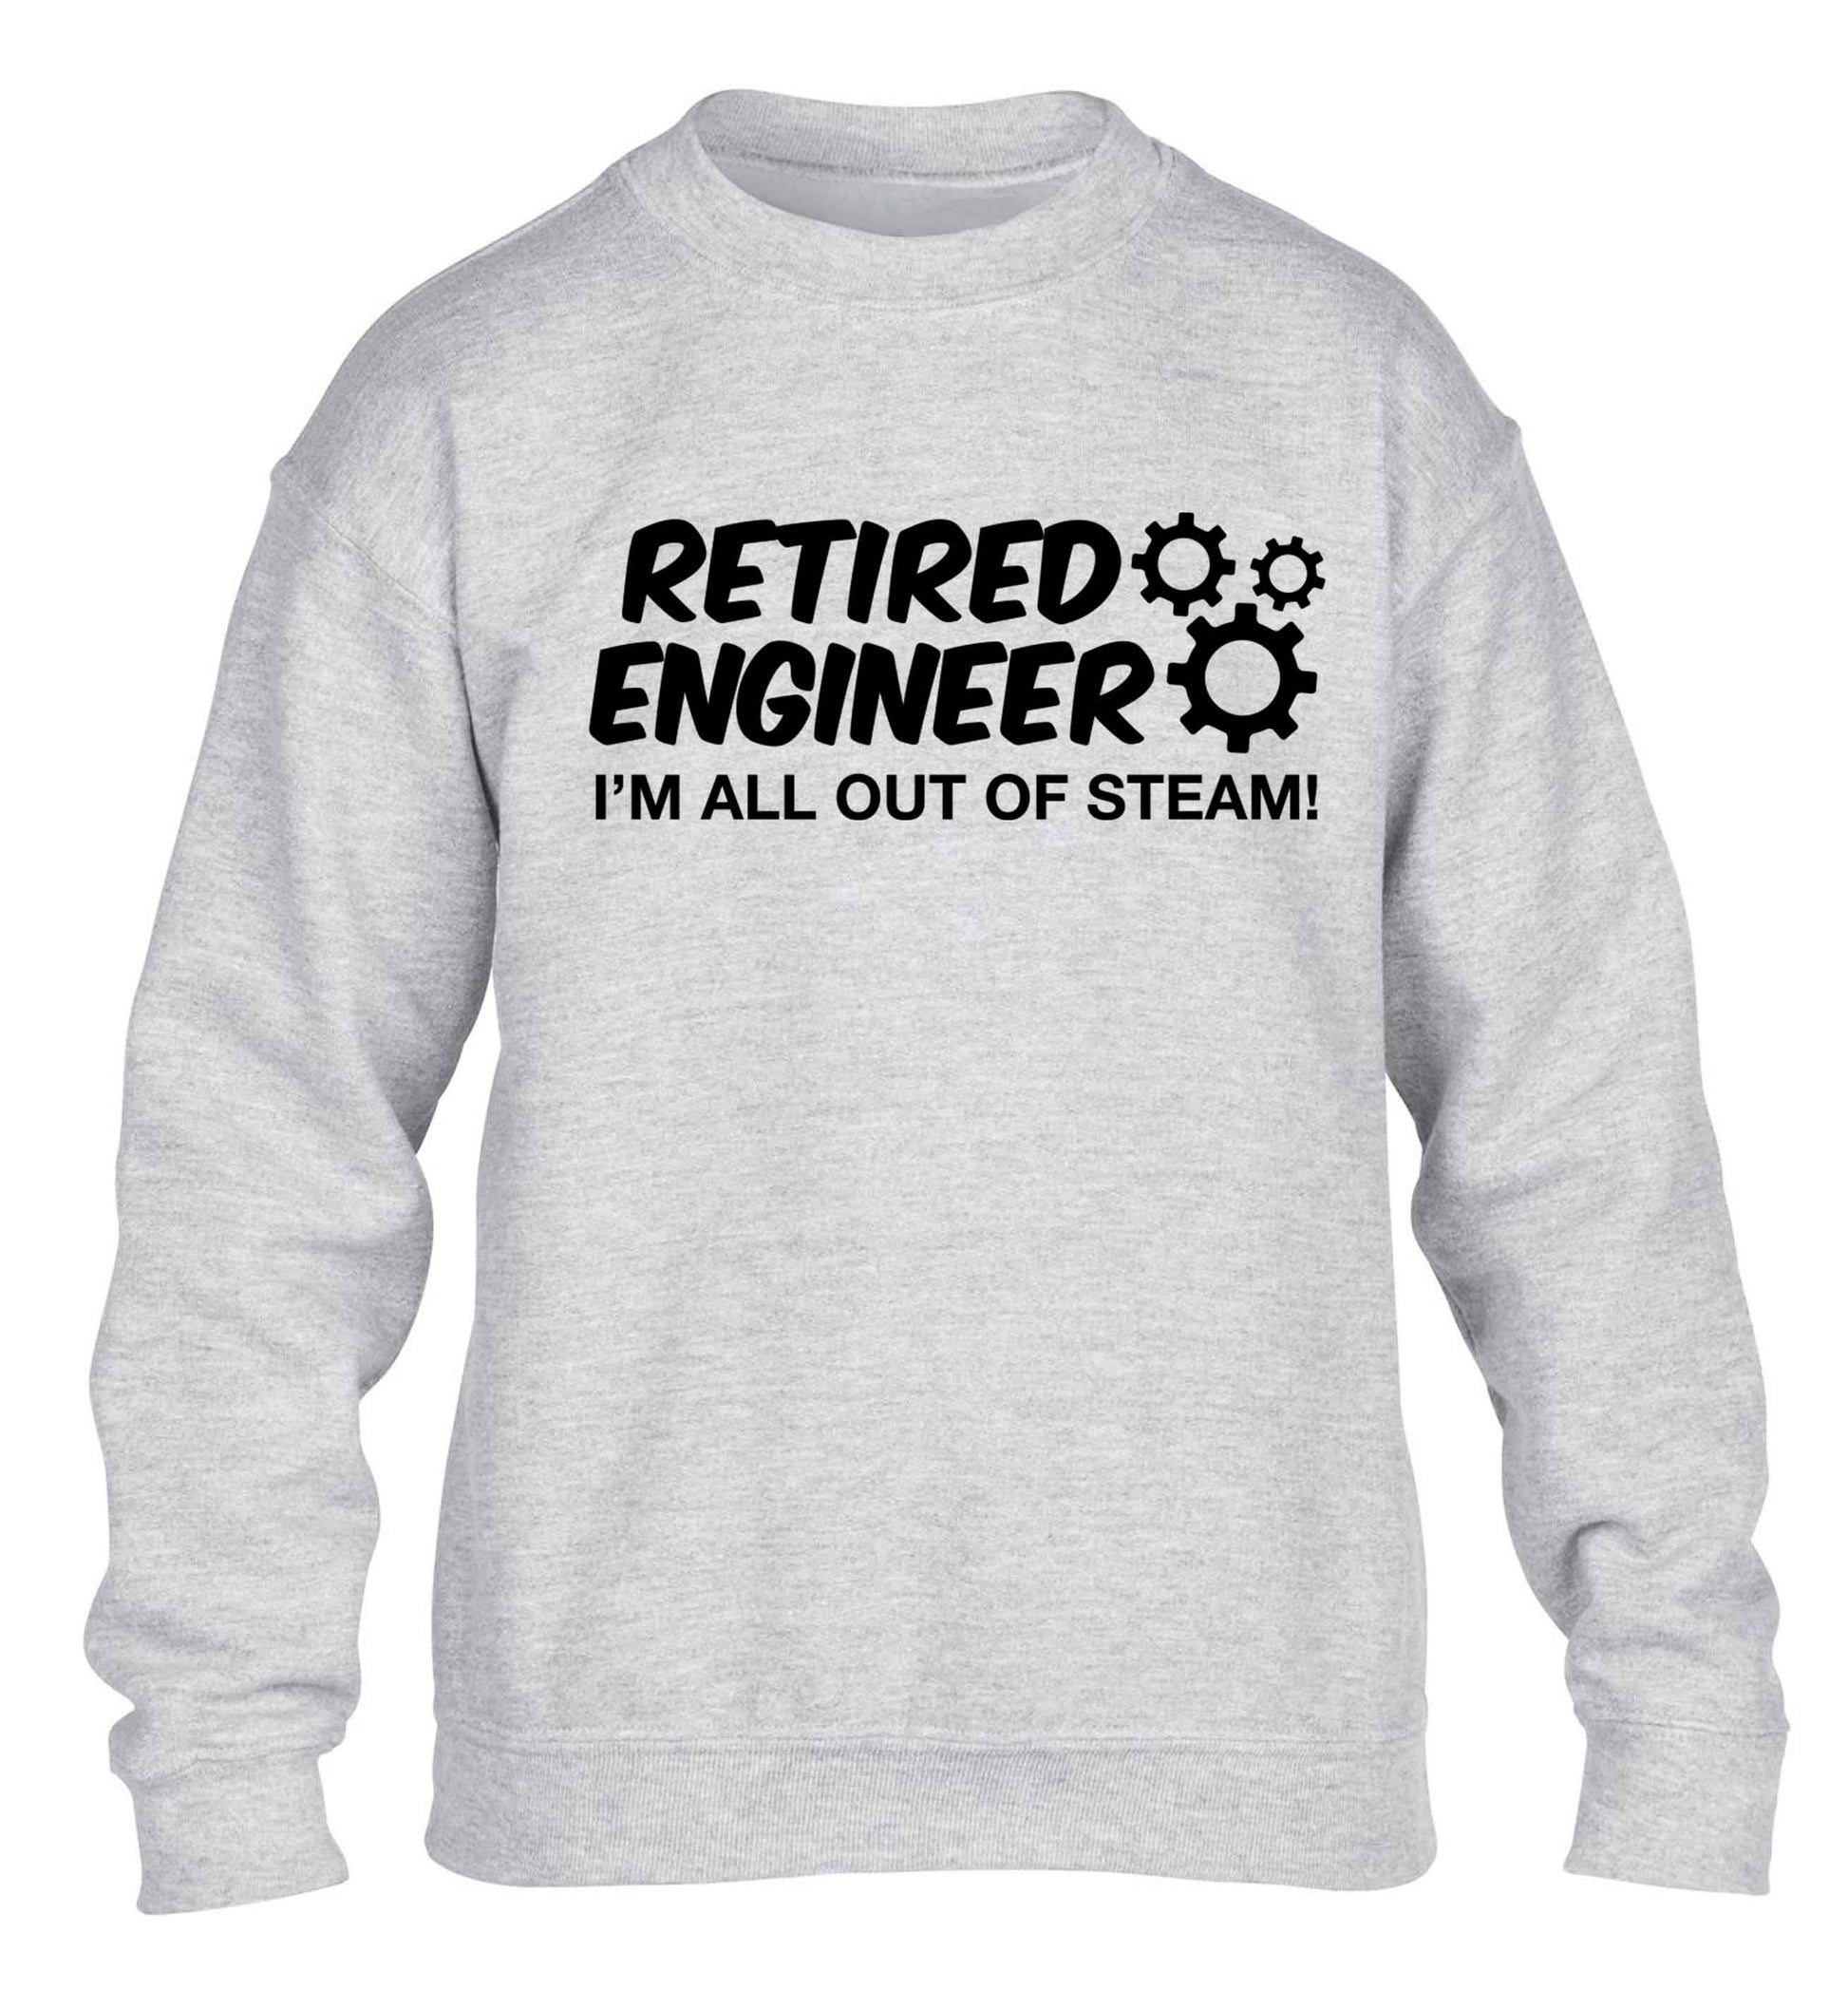 Retired engineer I'm all out of steam children's grey sweater 12-13 Years